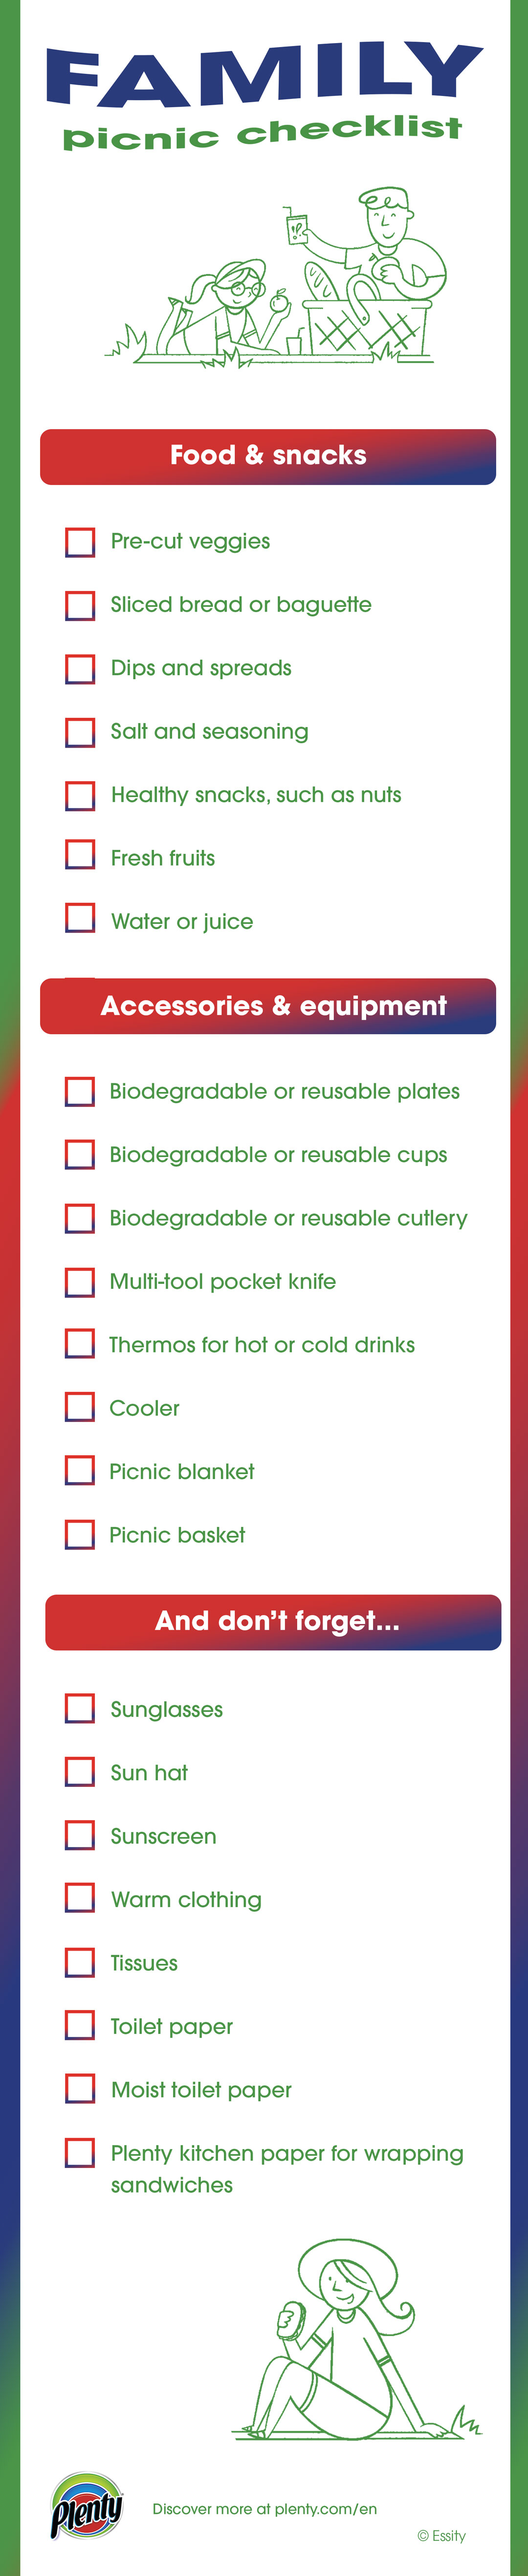 The picnic checklist: what to bring with you